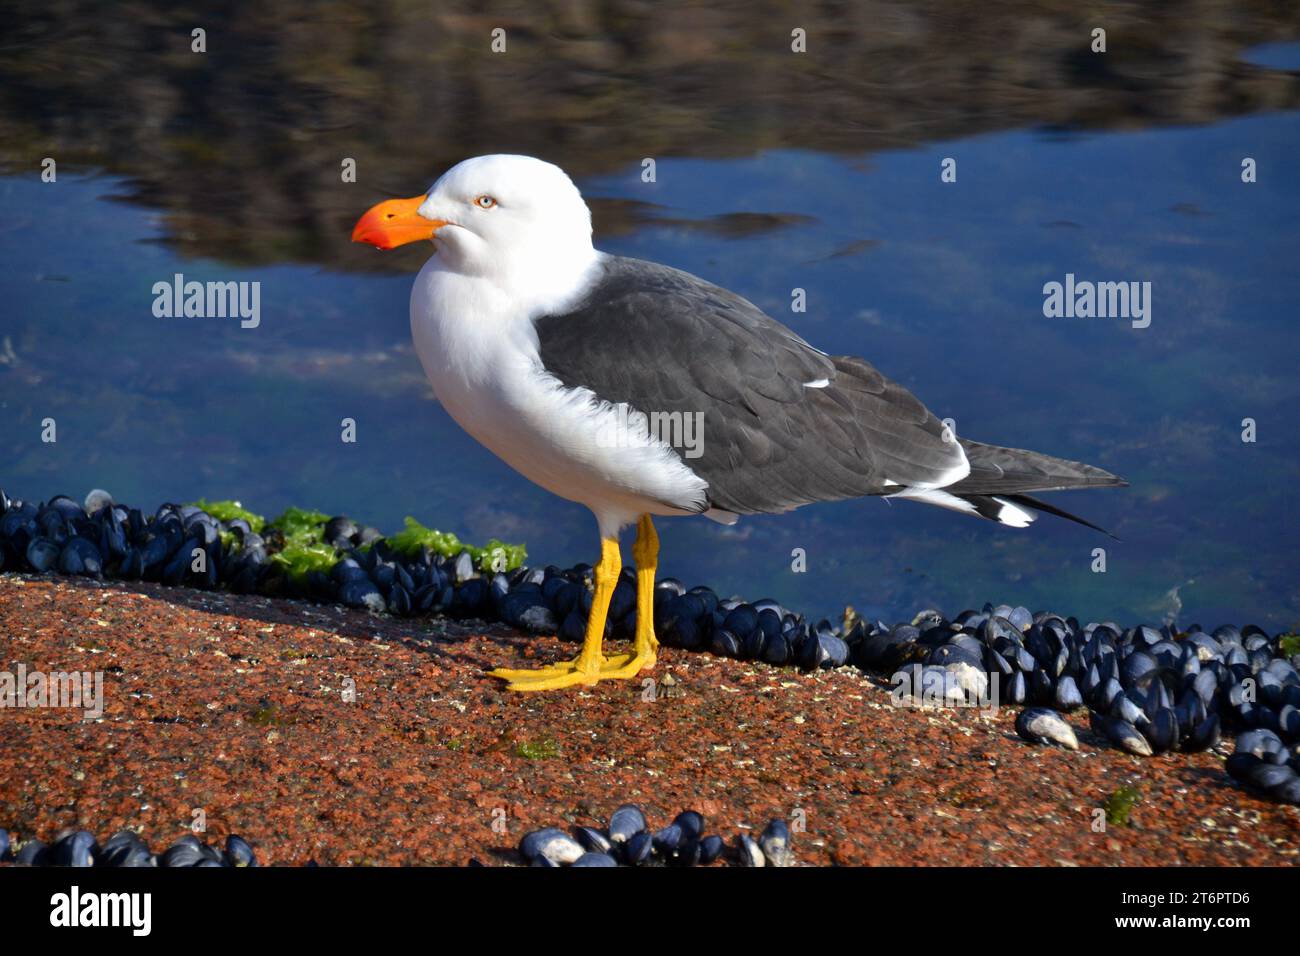 Large Pacific gull eating mussels at low tide in Freycinet National Park in Tasmania has bright yellow legs and a orange and red beak Stock Photo